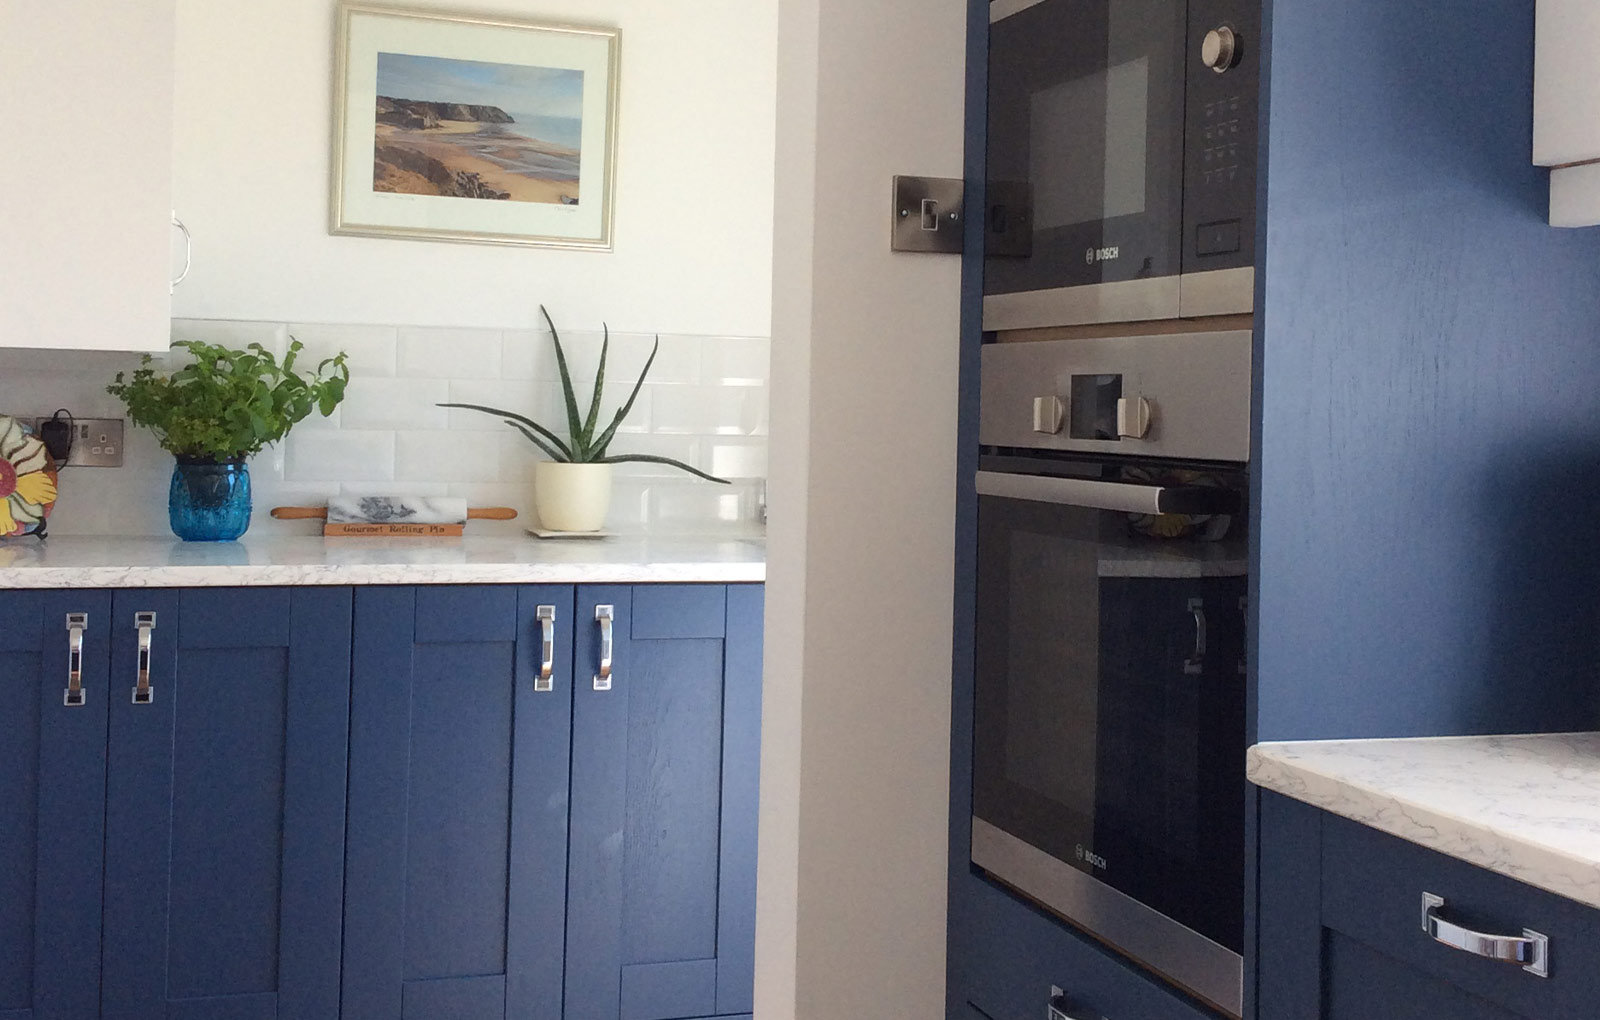 Classic blue kitchen with shaker style doors